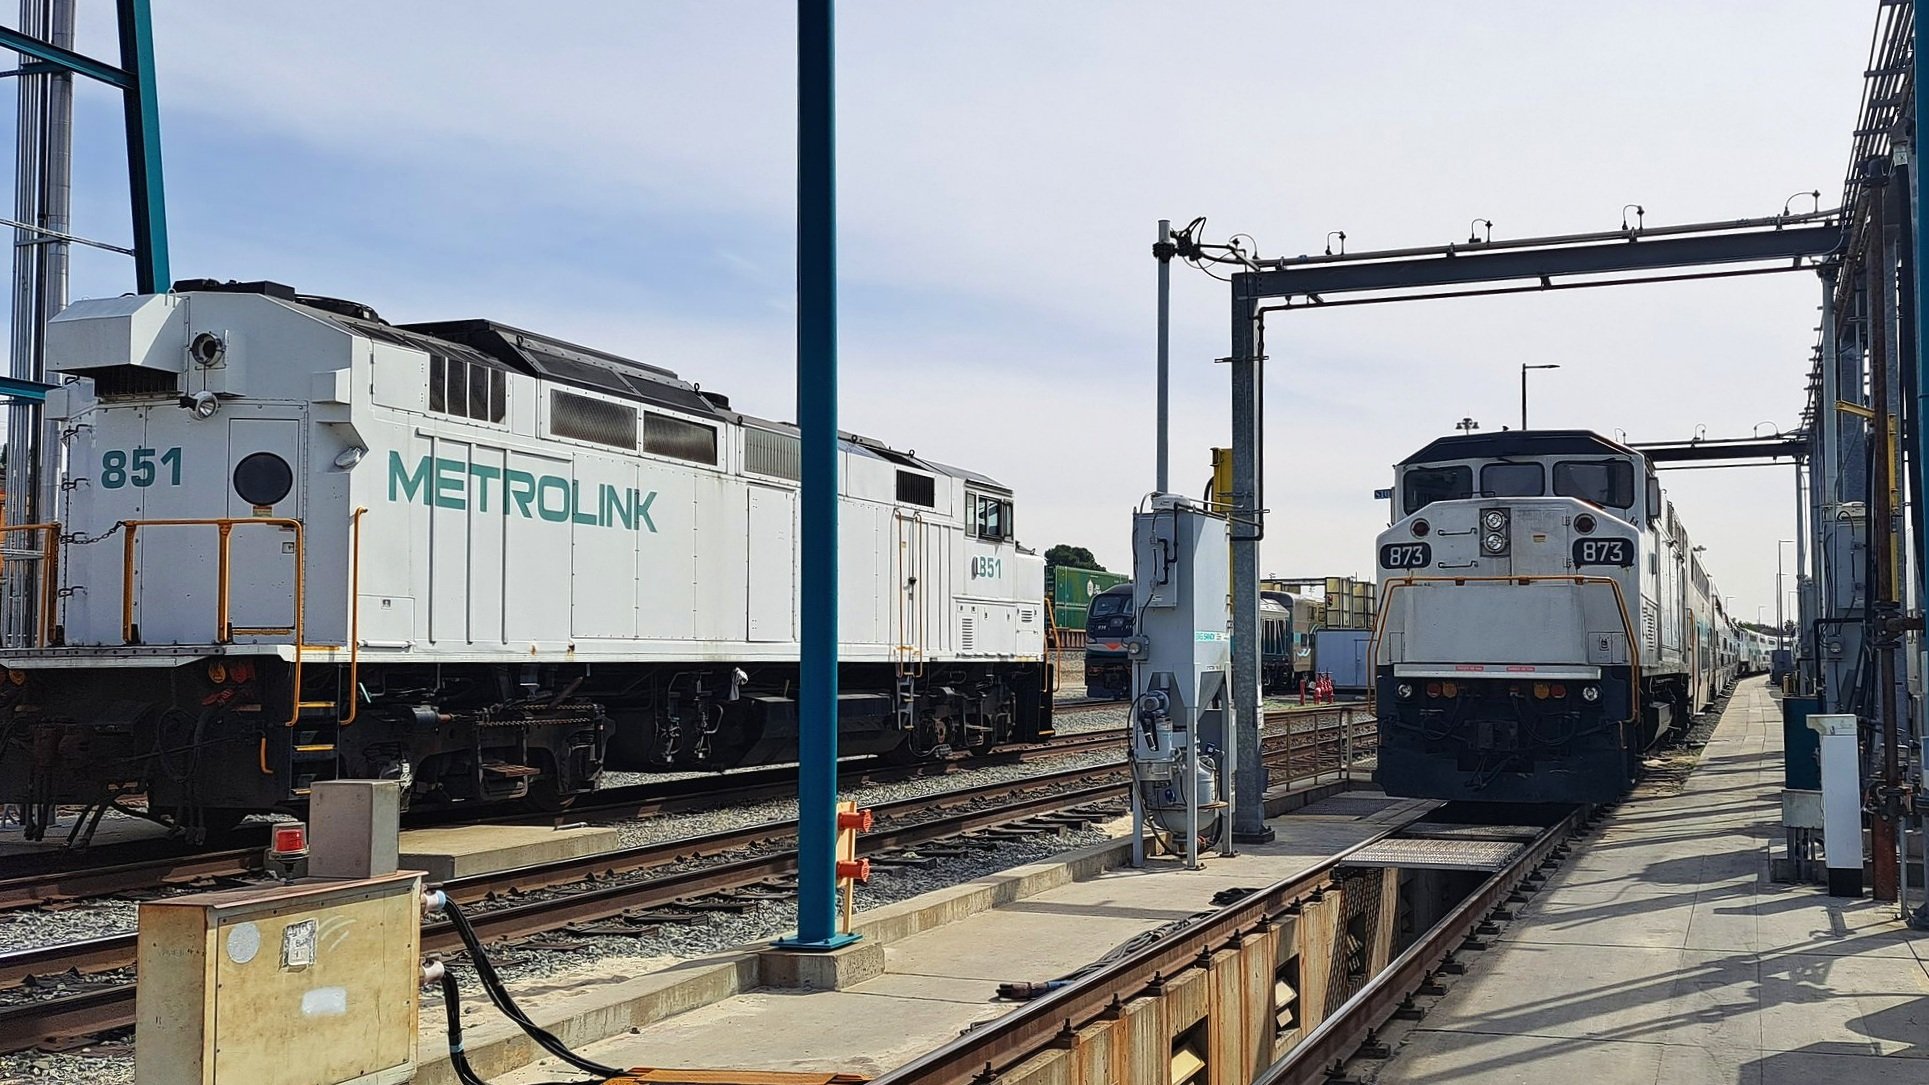  The first and last Metrolink F59PH-class locomotives stand idle in Metrolink’s Central Maintenance Facility, still running after 30 years and a midlife overhaul. (Alex Lewis, 2022) 